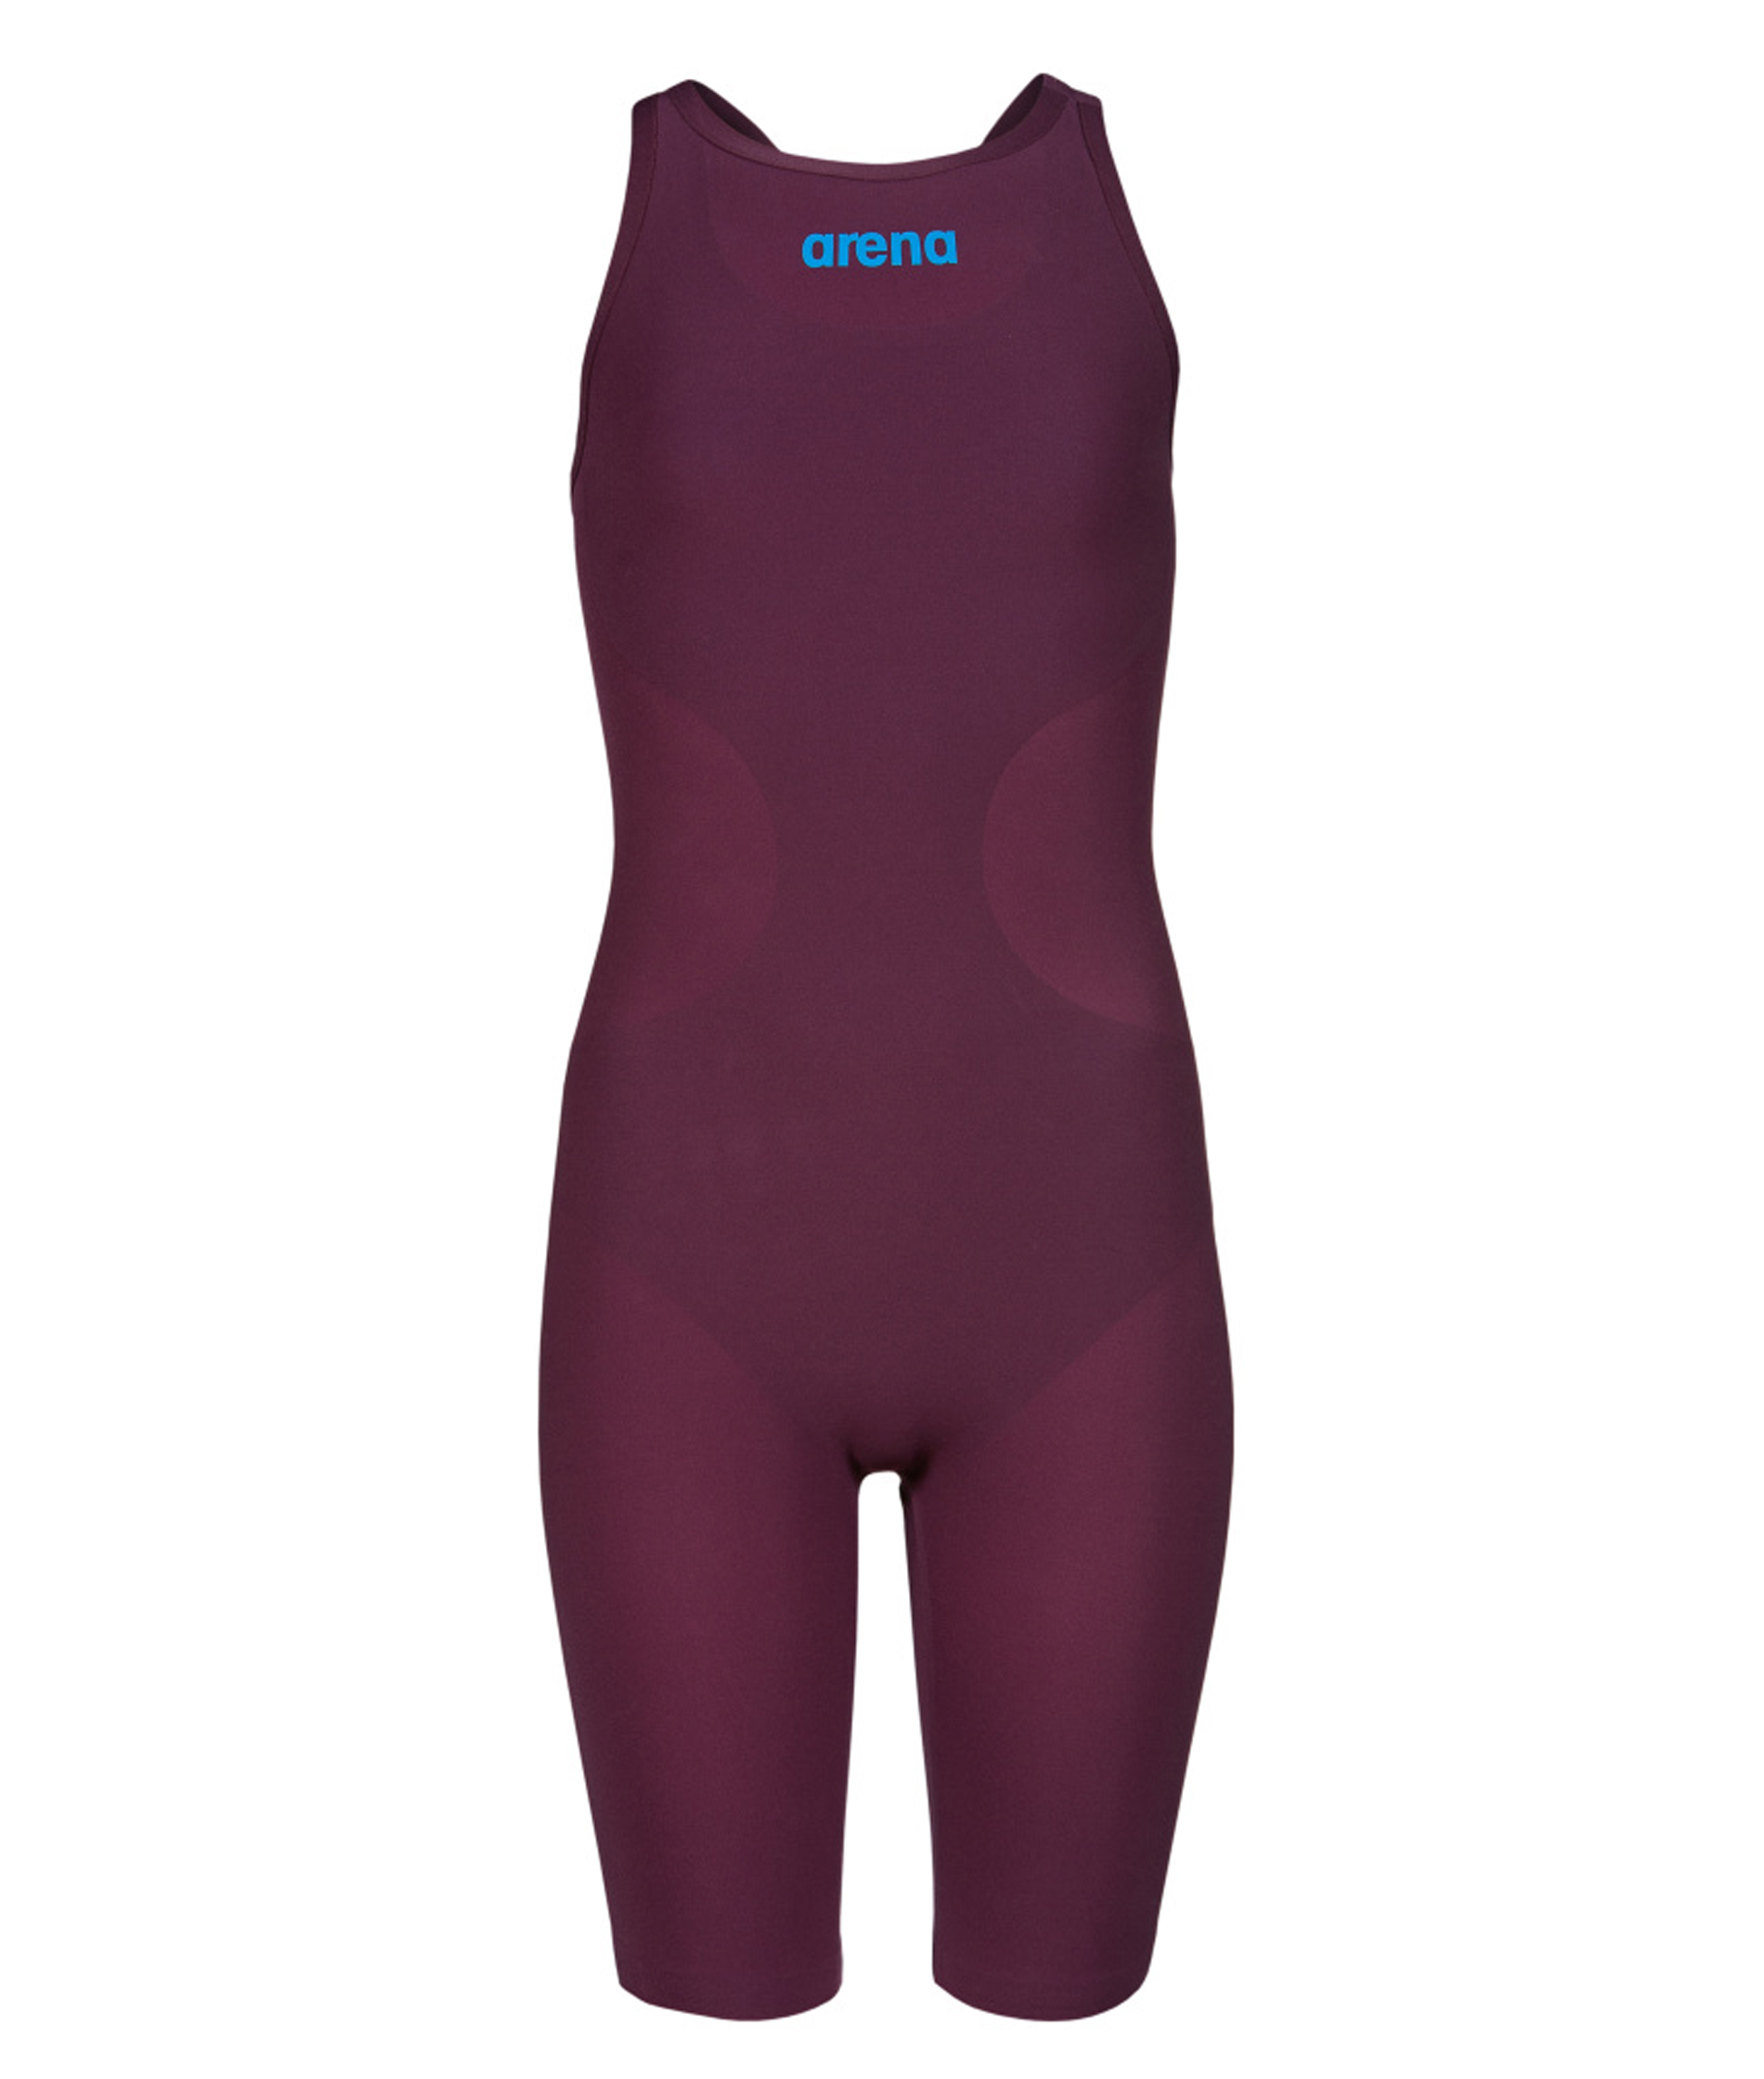 Arena Girls Powerskin R-EVO ONE Open Back Race Suit - Red Wine/Turquoise